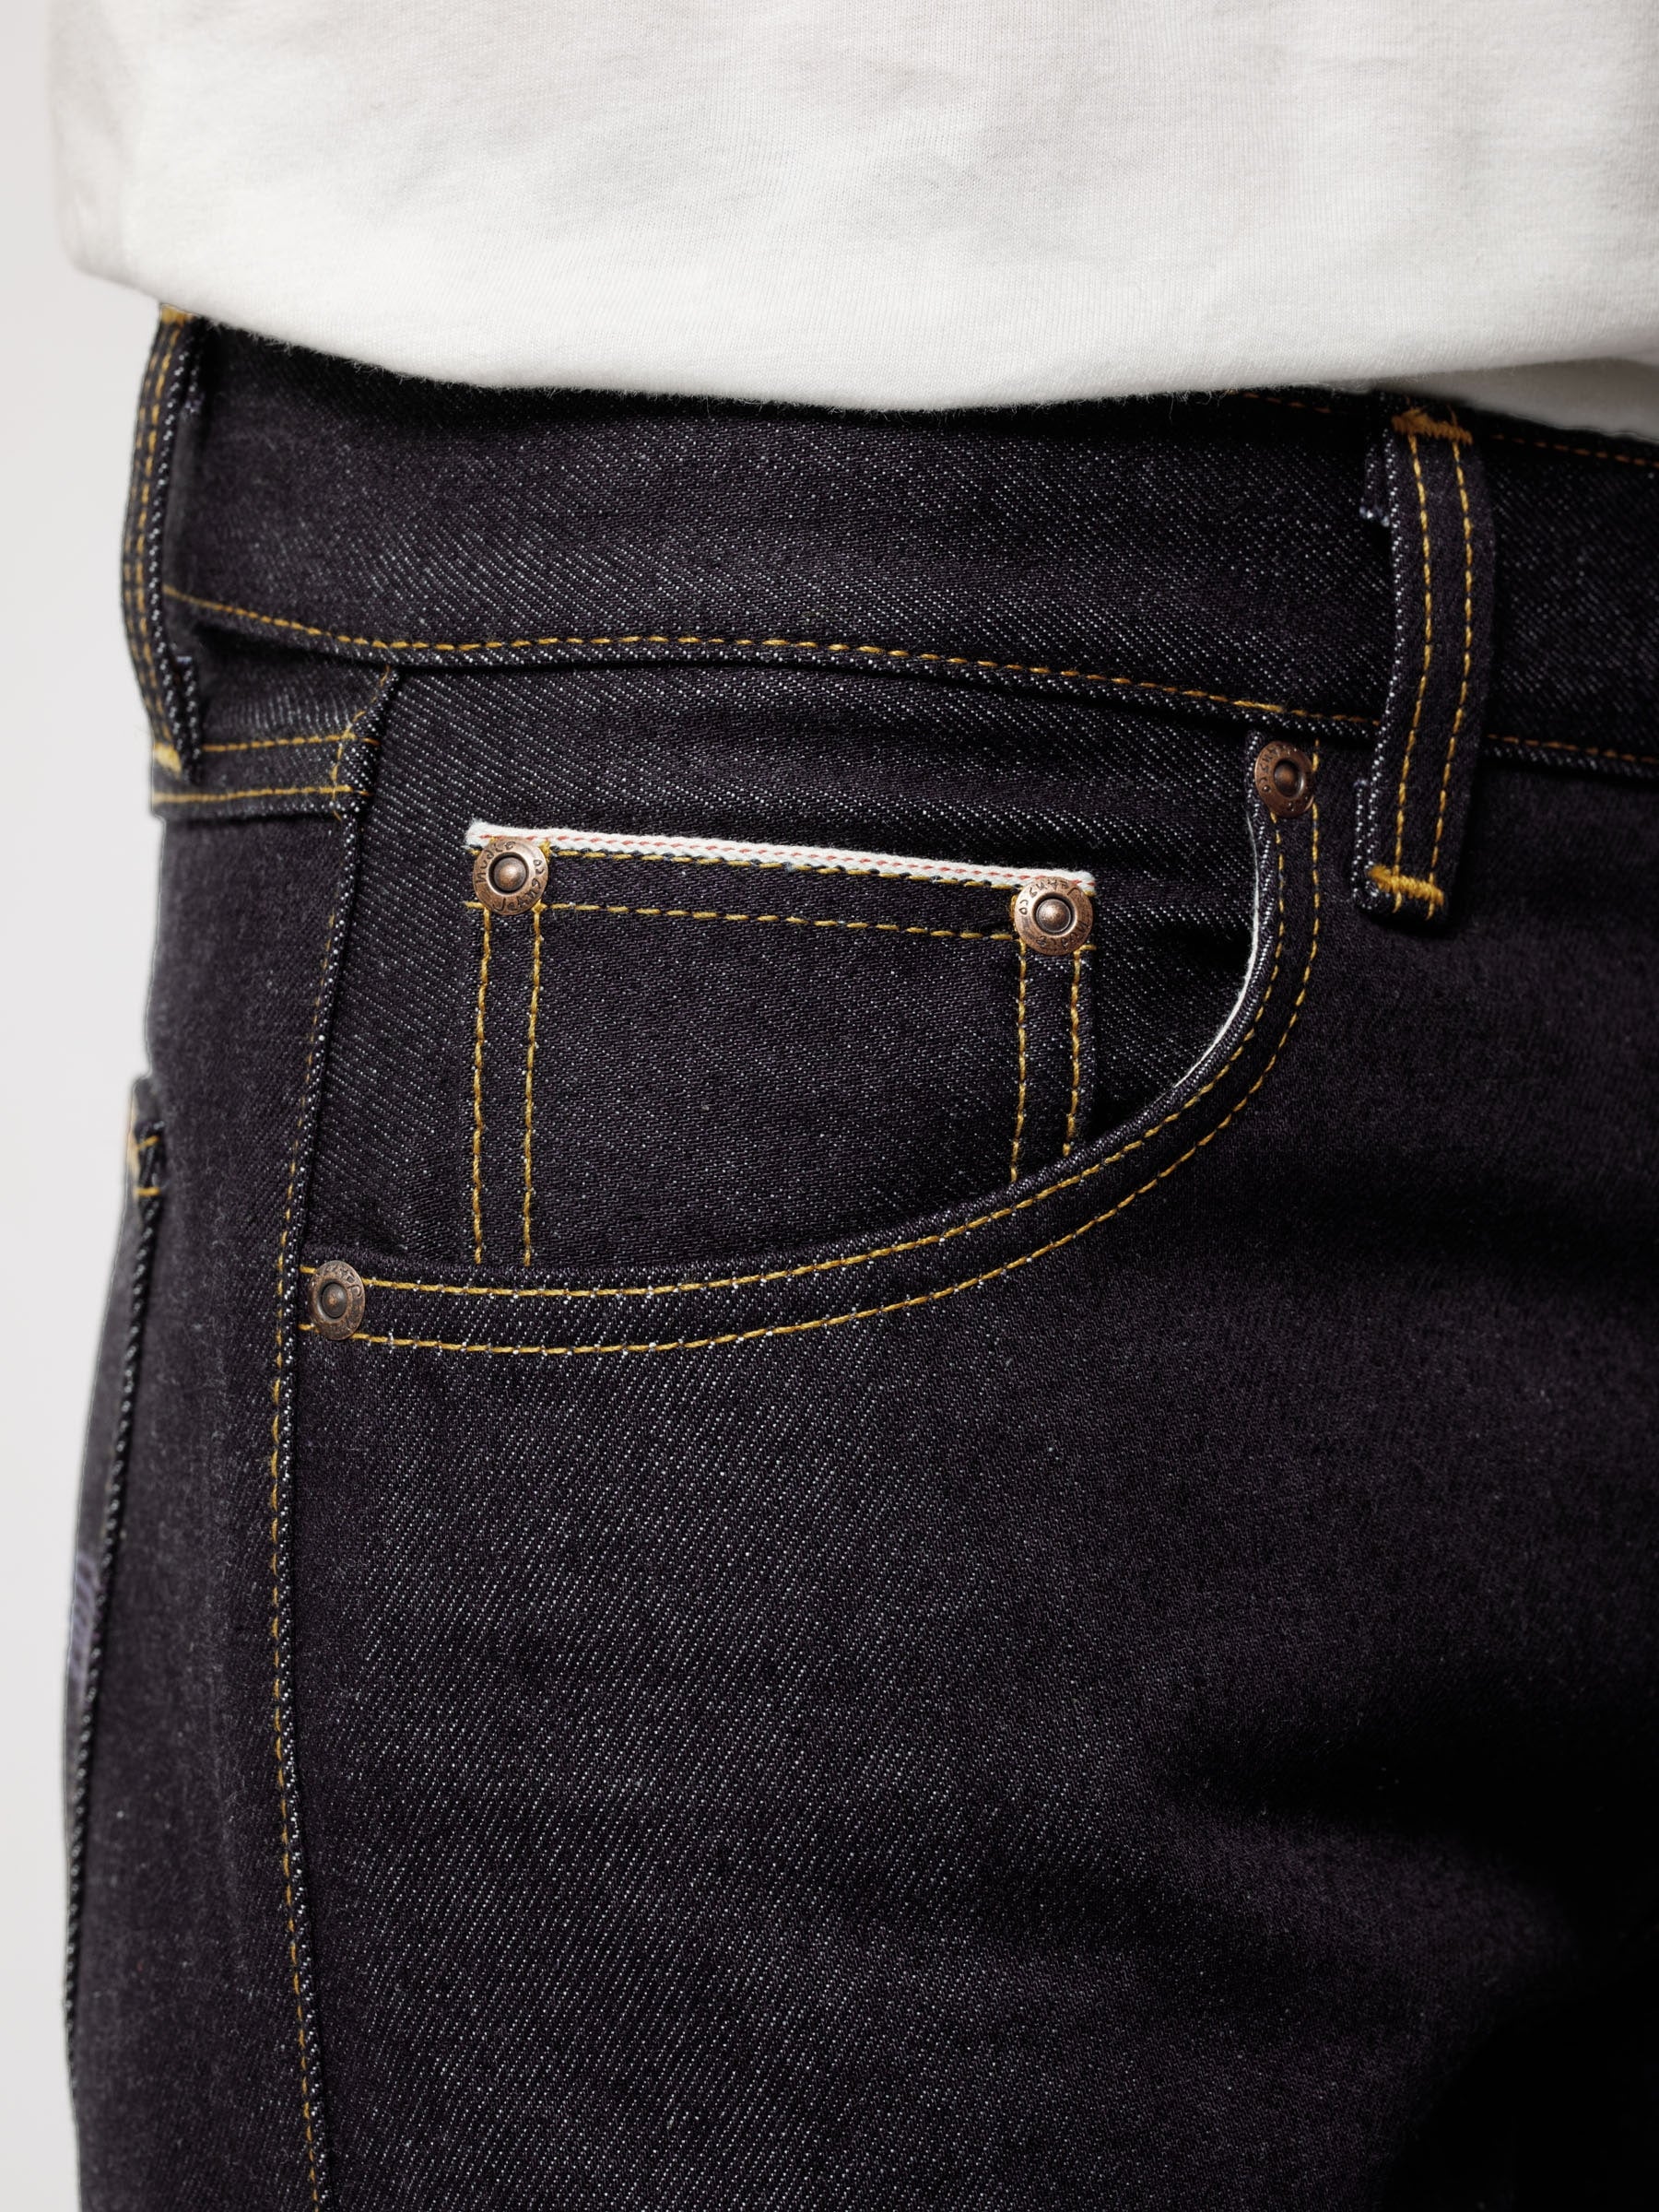 Nudie - Gritty Jackson Jean - Dry Maze Selvage